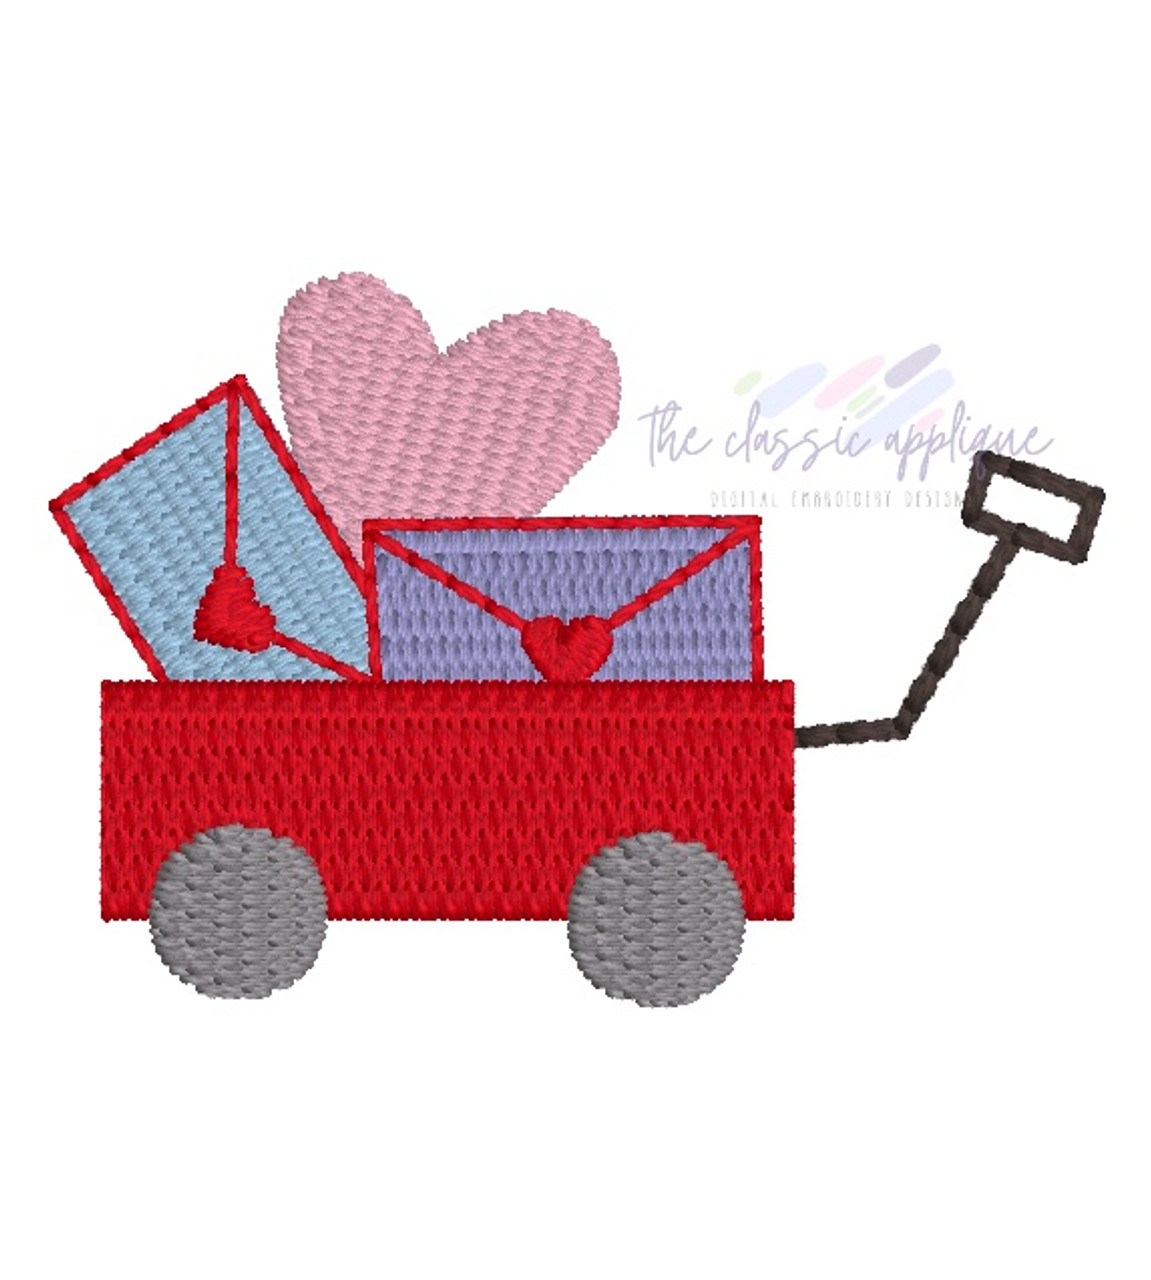 Mini Hearts Machine Embroidery Design Composition of Three Hearts Flying  Hearts Fill Stitch Small Valentine Hearts INSTANT DOWNLOAD -  Finland